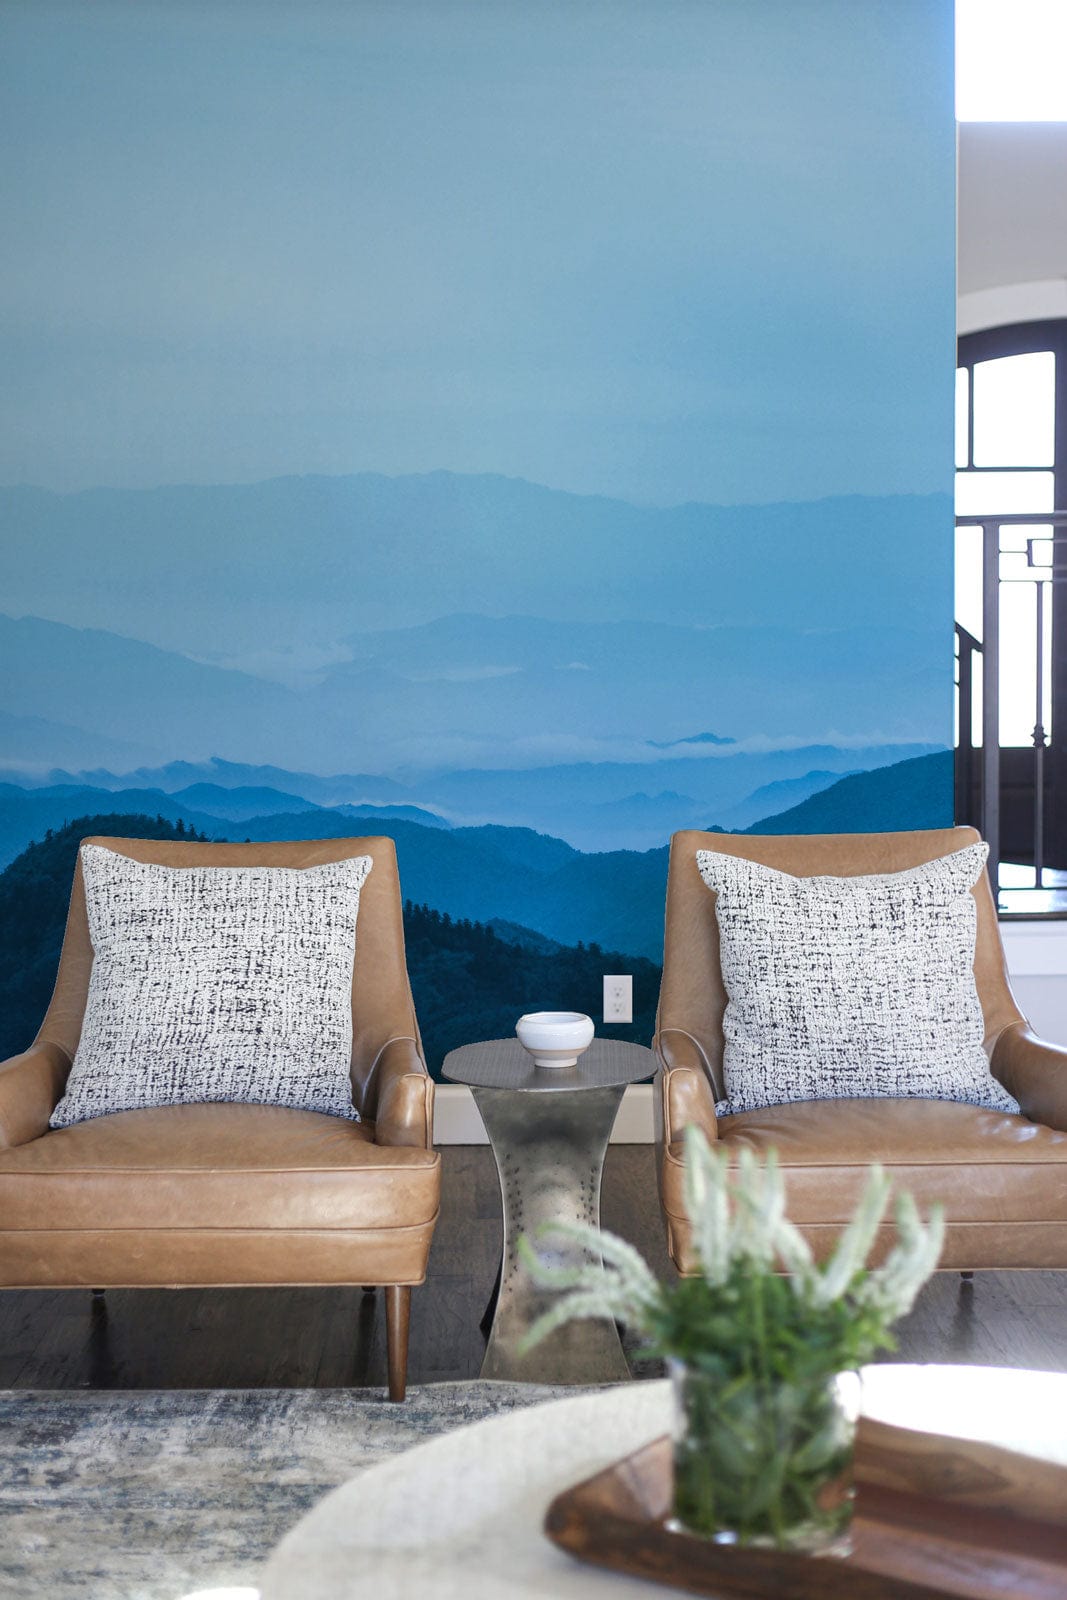 Blue Misty Hilltops is a Wallpaper Mural for the Living Room that Decorates the Room.